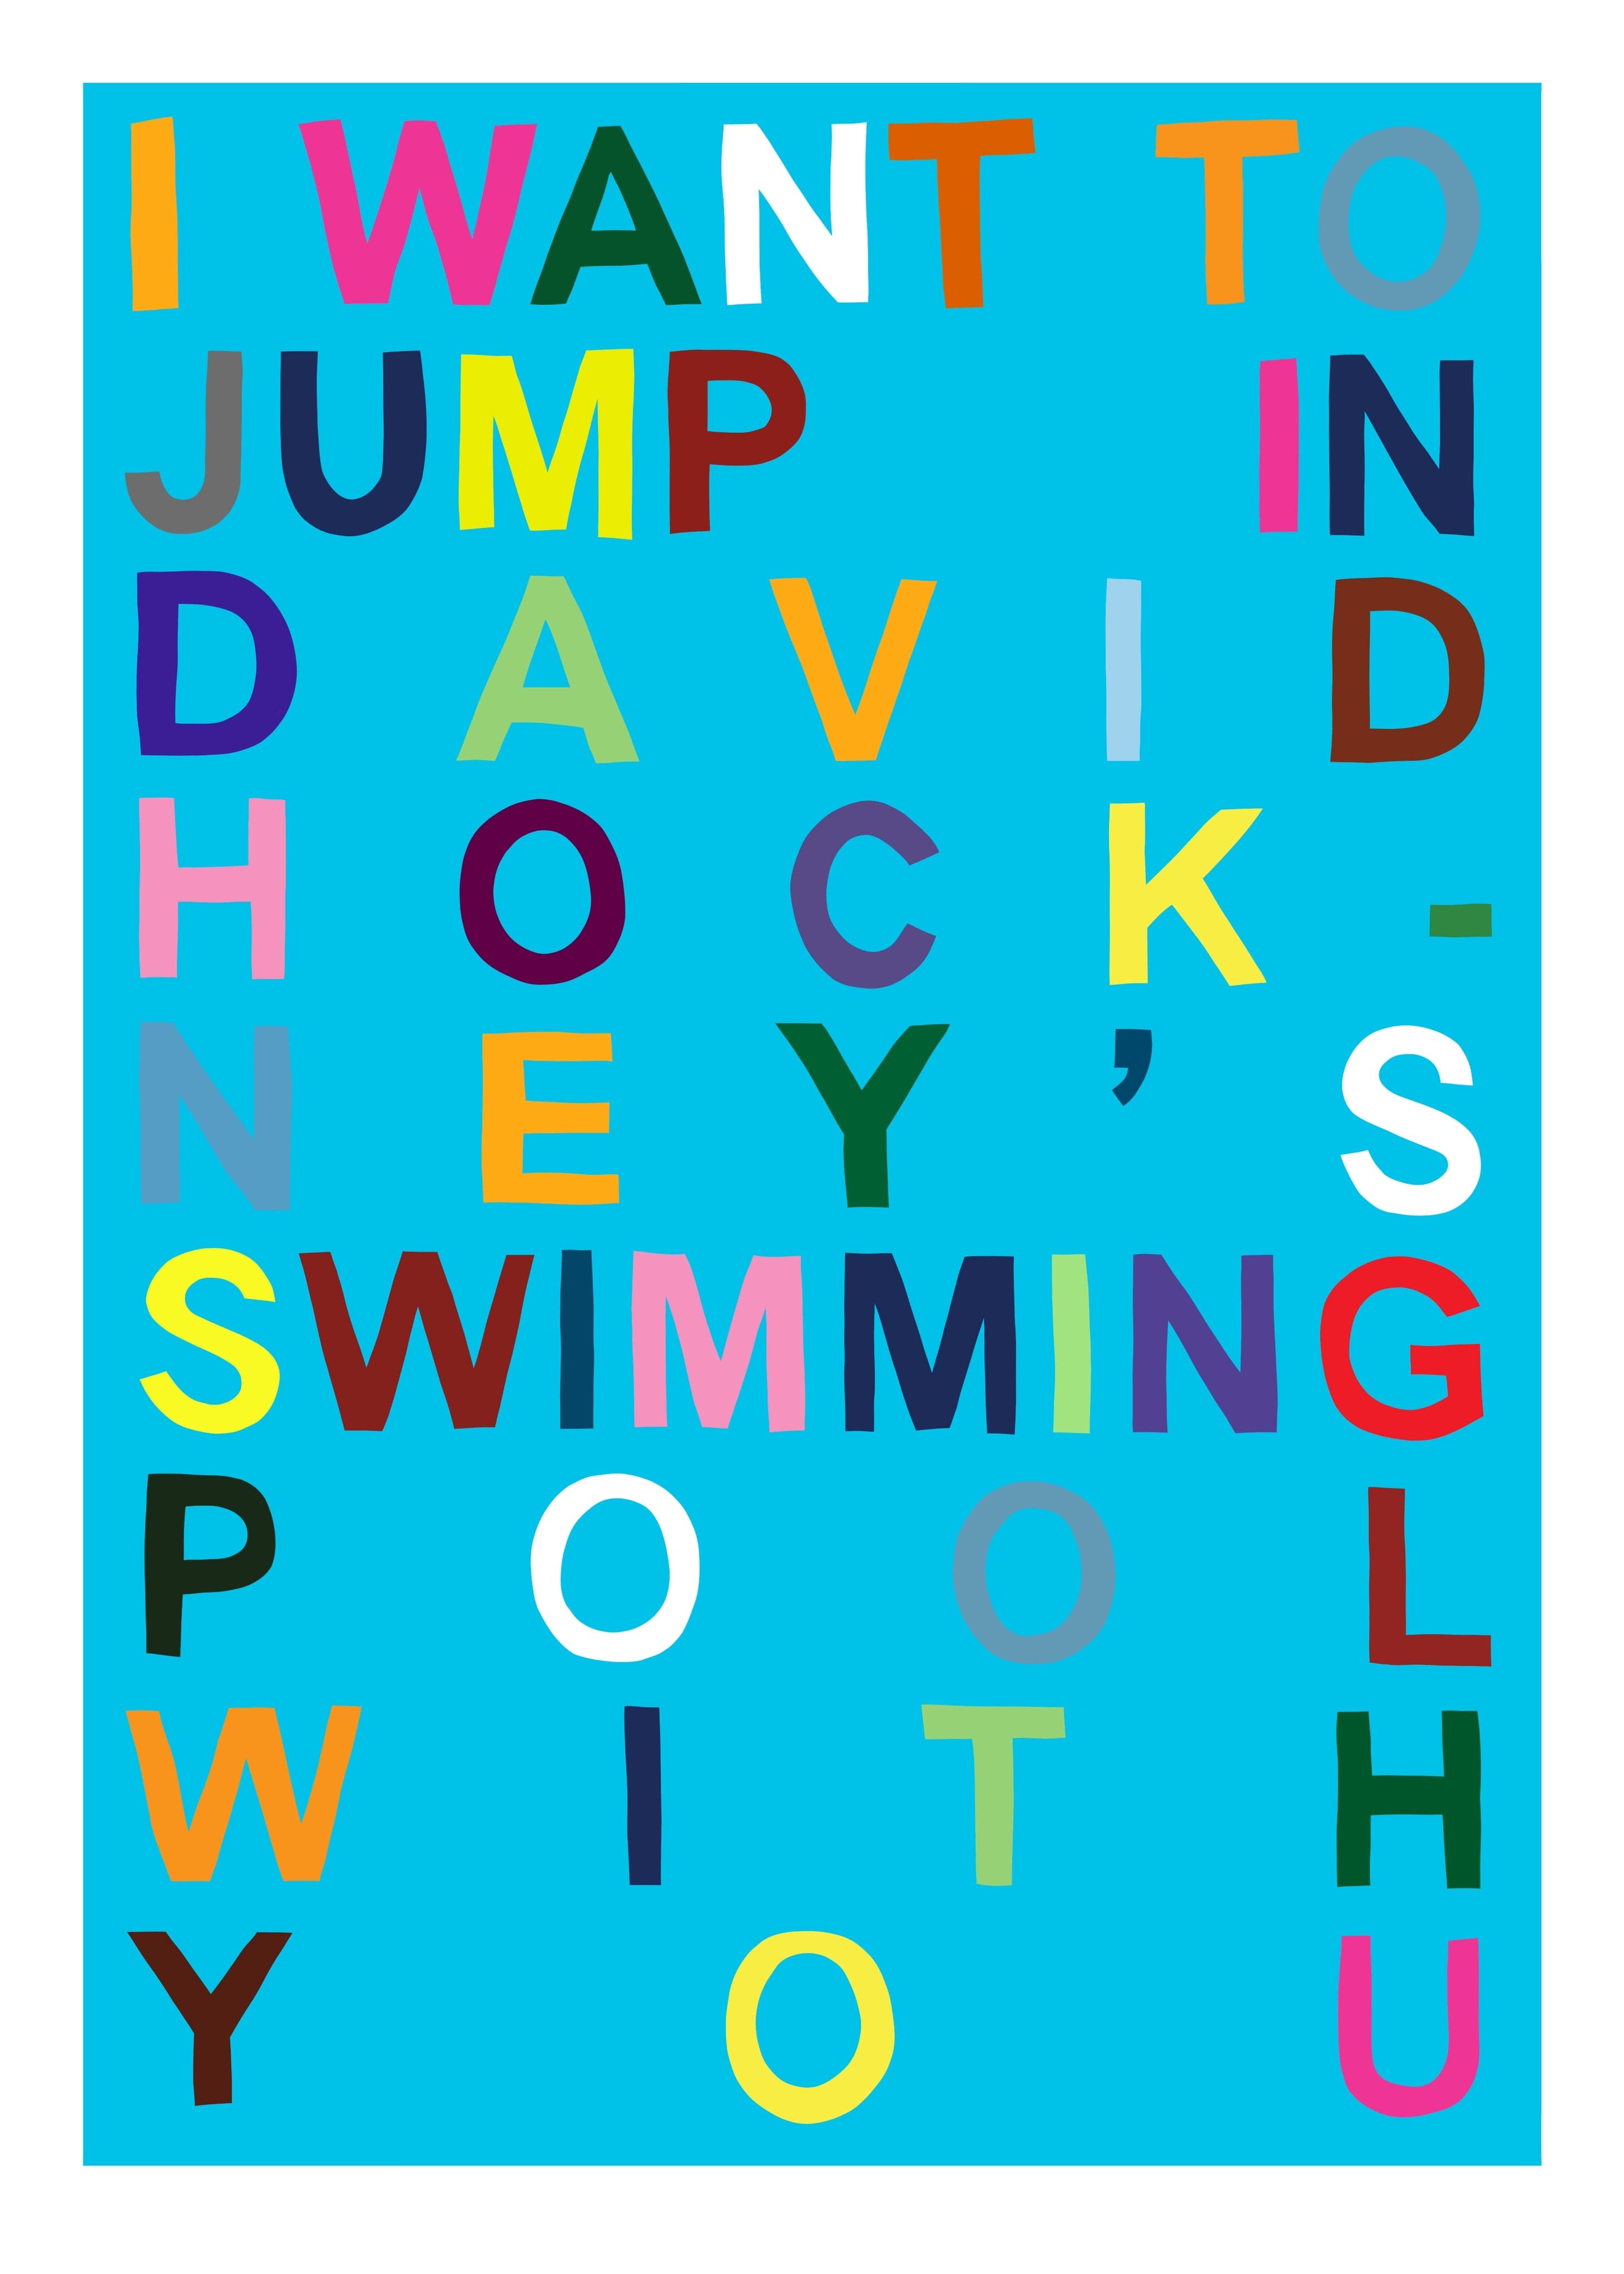 Image of I Want to Jump in David Hockney's Swimming Pool with You artwork by Benjamin Thomas Taylor, free delivery